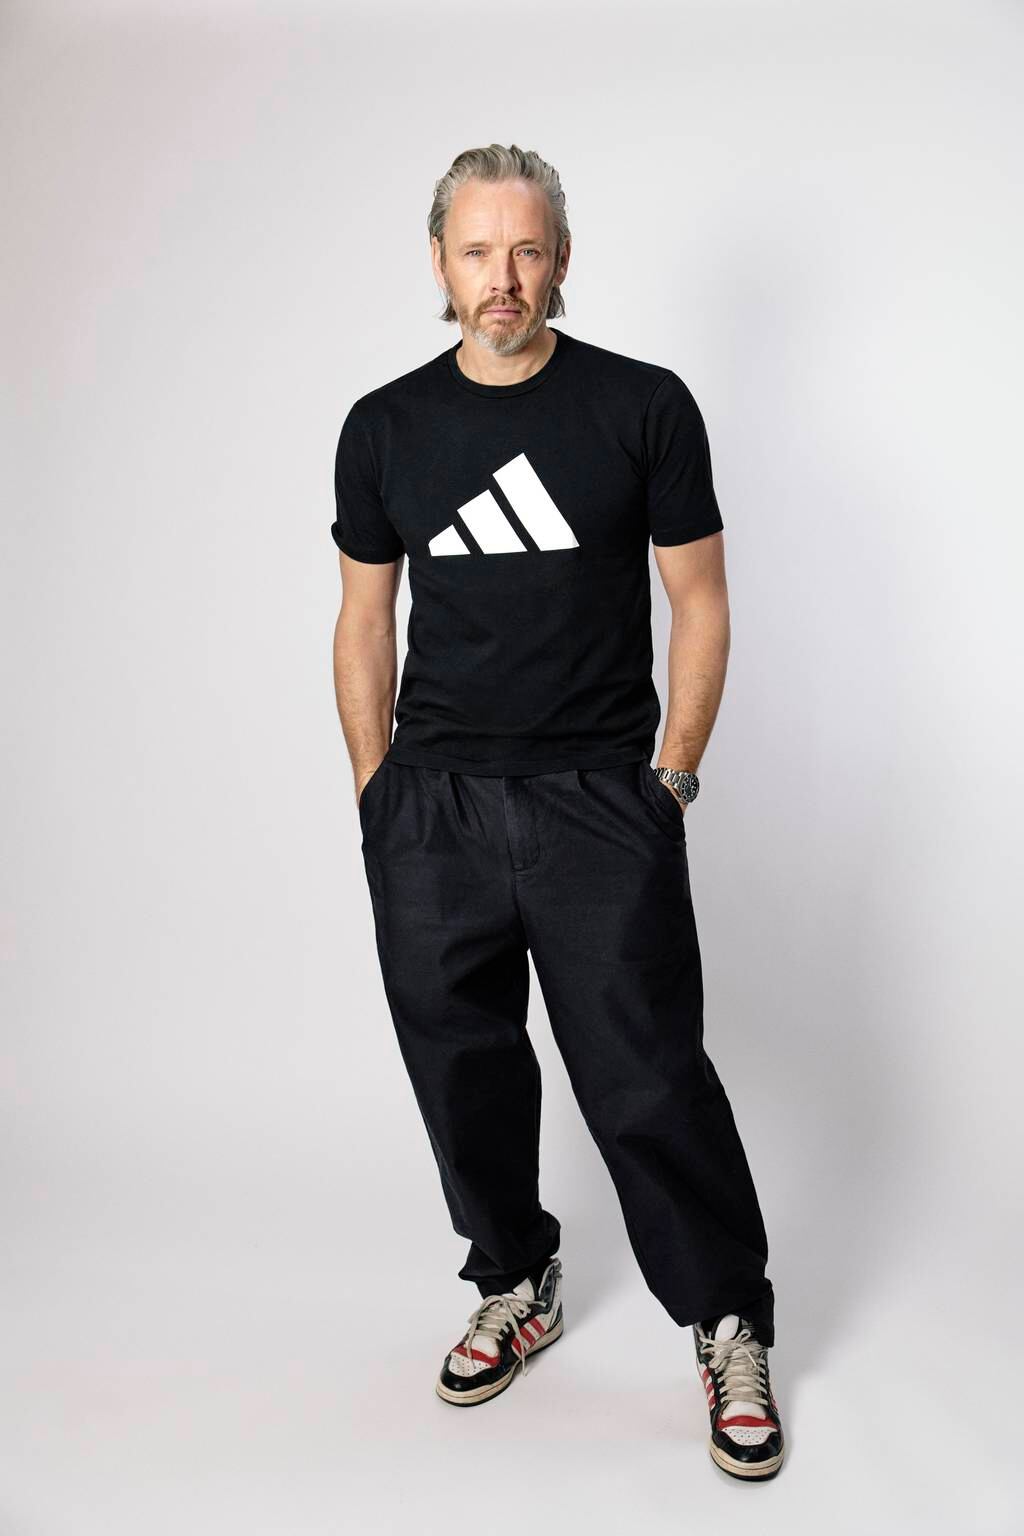 Alasdhair Willis is Adidas' chief creative officer.